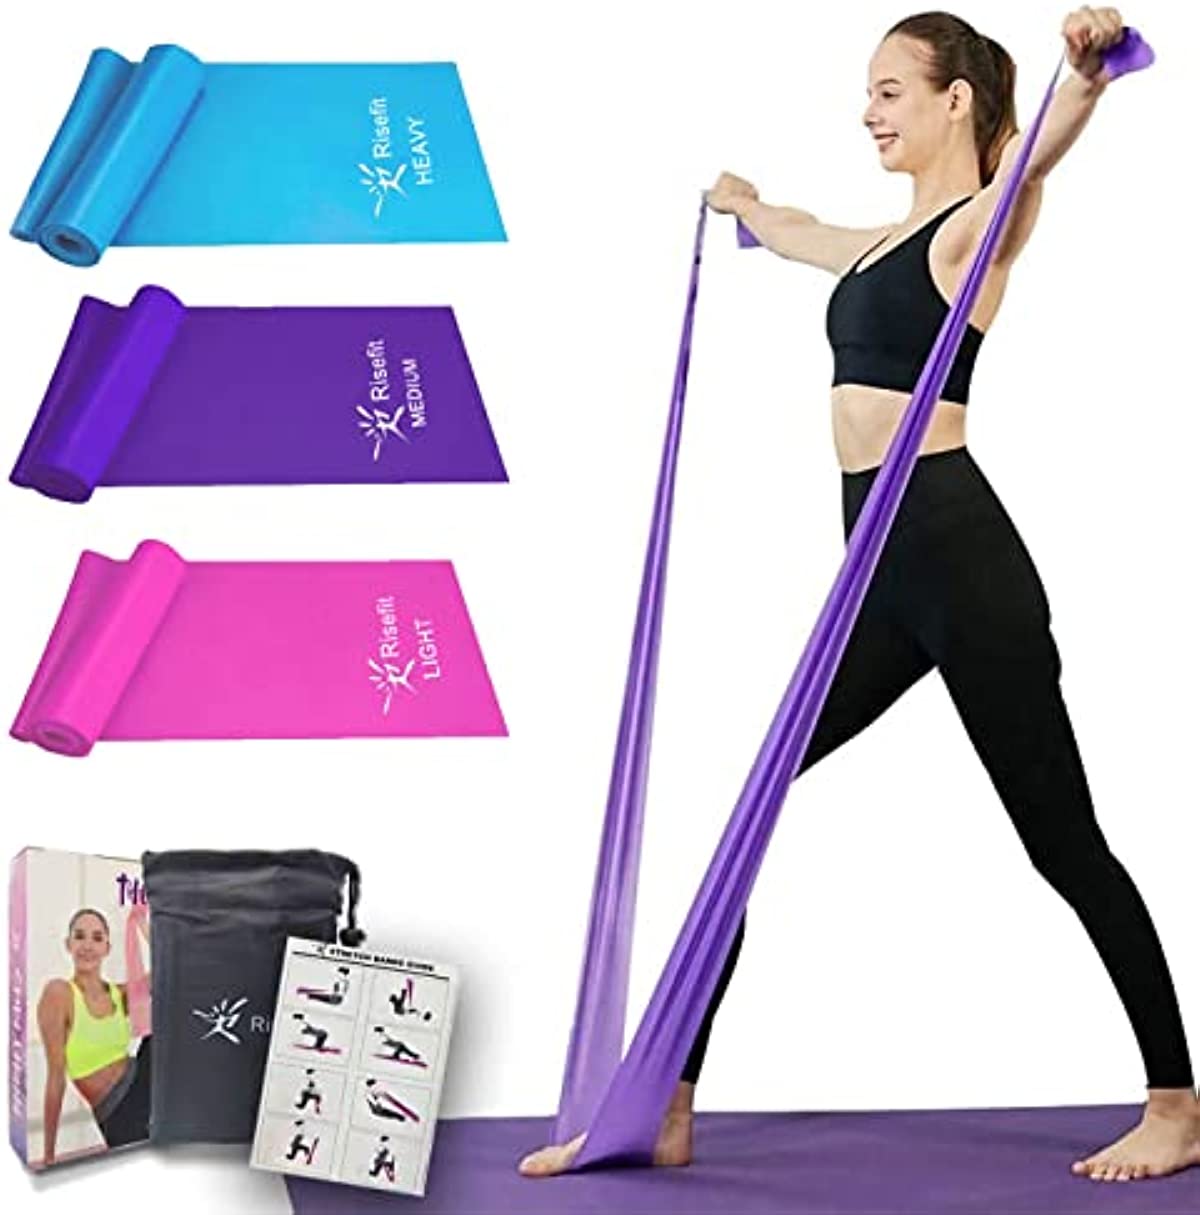 Therapy Flat Resistance Bands Set, Latex Free Flat Elastic Exercise Stretch Bands for Stretching, Flexibility, Pilates, Yoga, Ballet, Gymnastics, Rehab, Workout, Pink, Purple, Blue (3 Pack, 5 FT long)